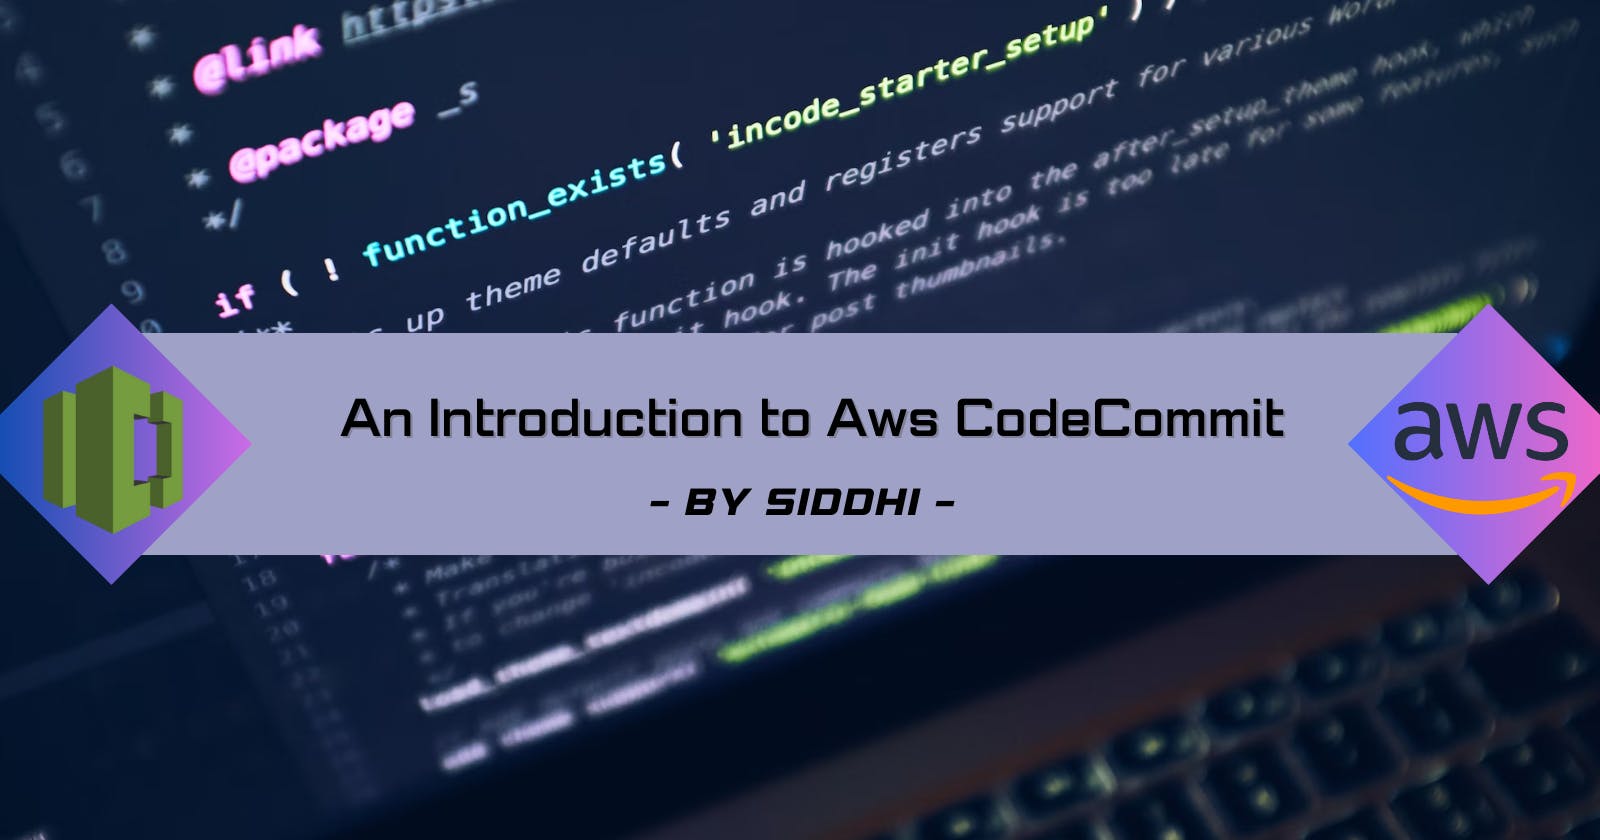 An Introduction to Aws CodeCommit